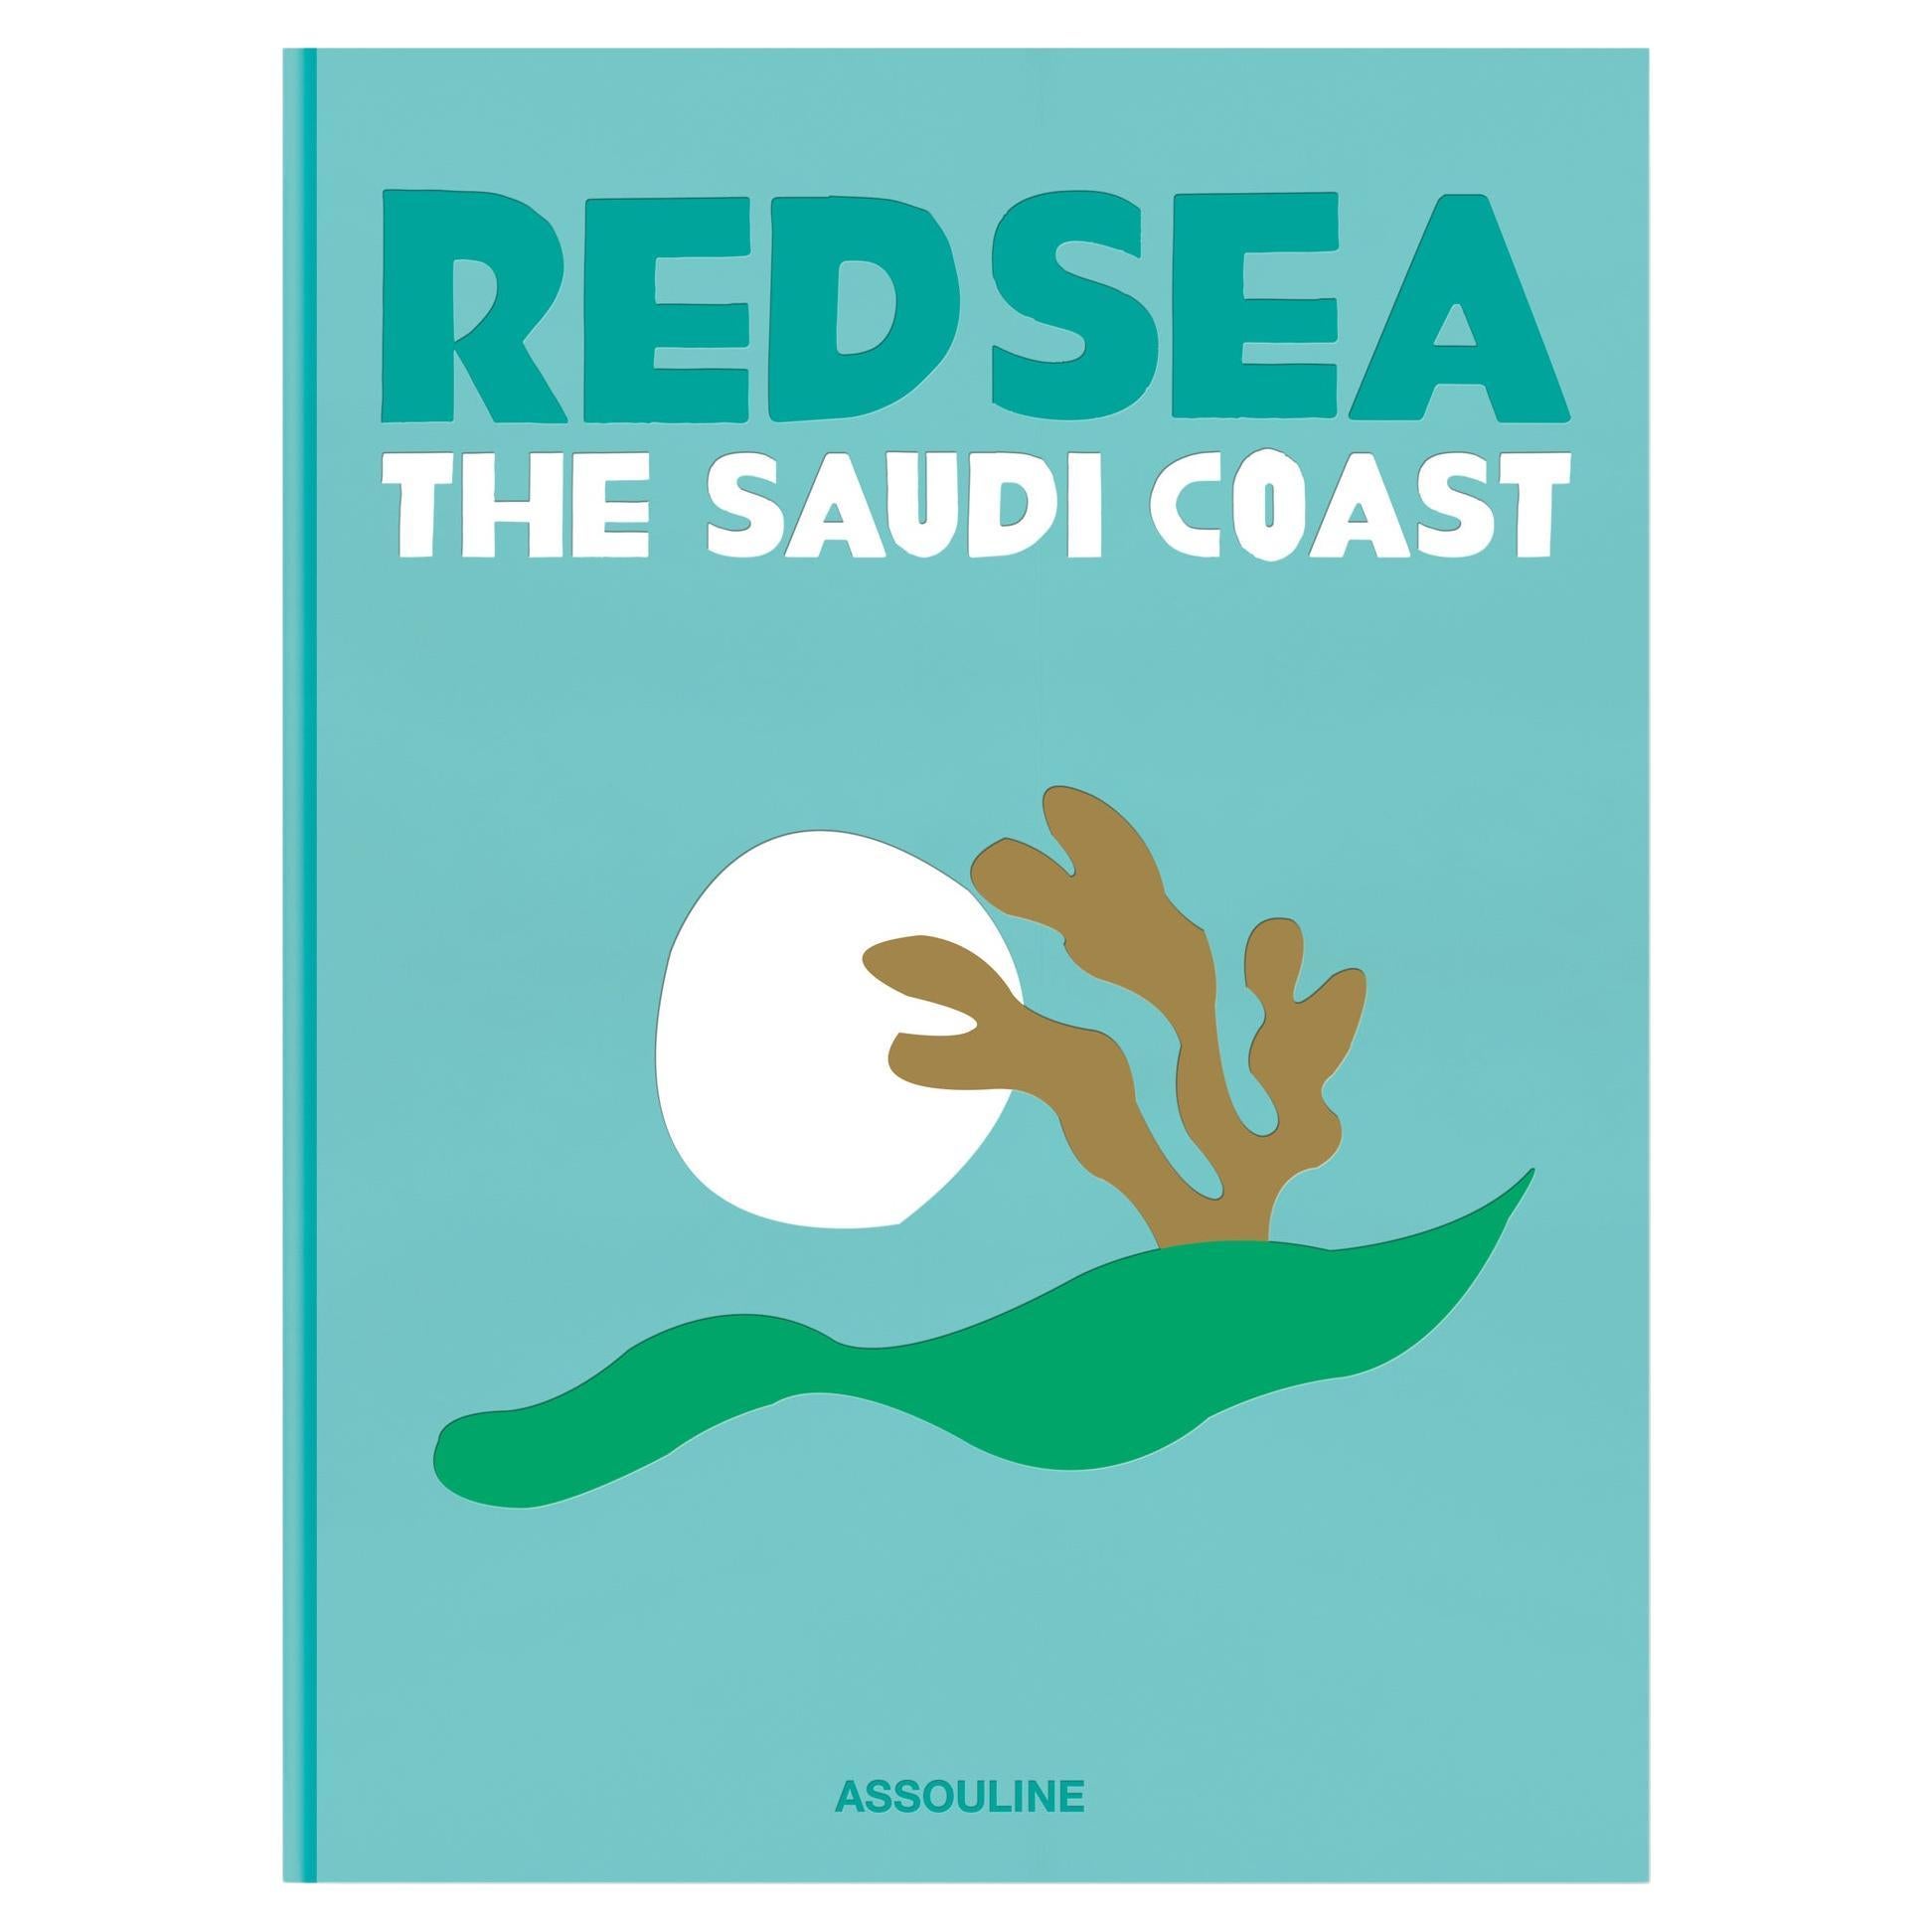 Bordering the coastlines of eight countries, the Red Sea is a melting pot of civilizations, faiths and hopes. With unique coral reefs and diverse underwater life, the untouched nature and unmatched biodiversity thrive in the aquatic environment and